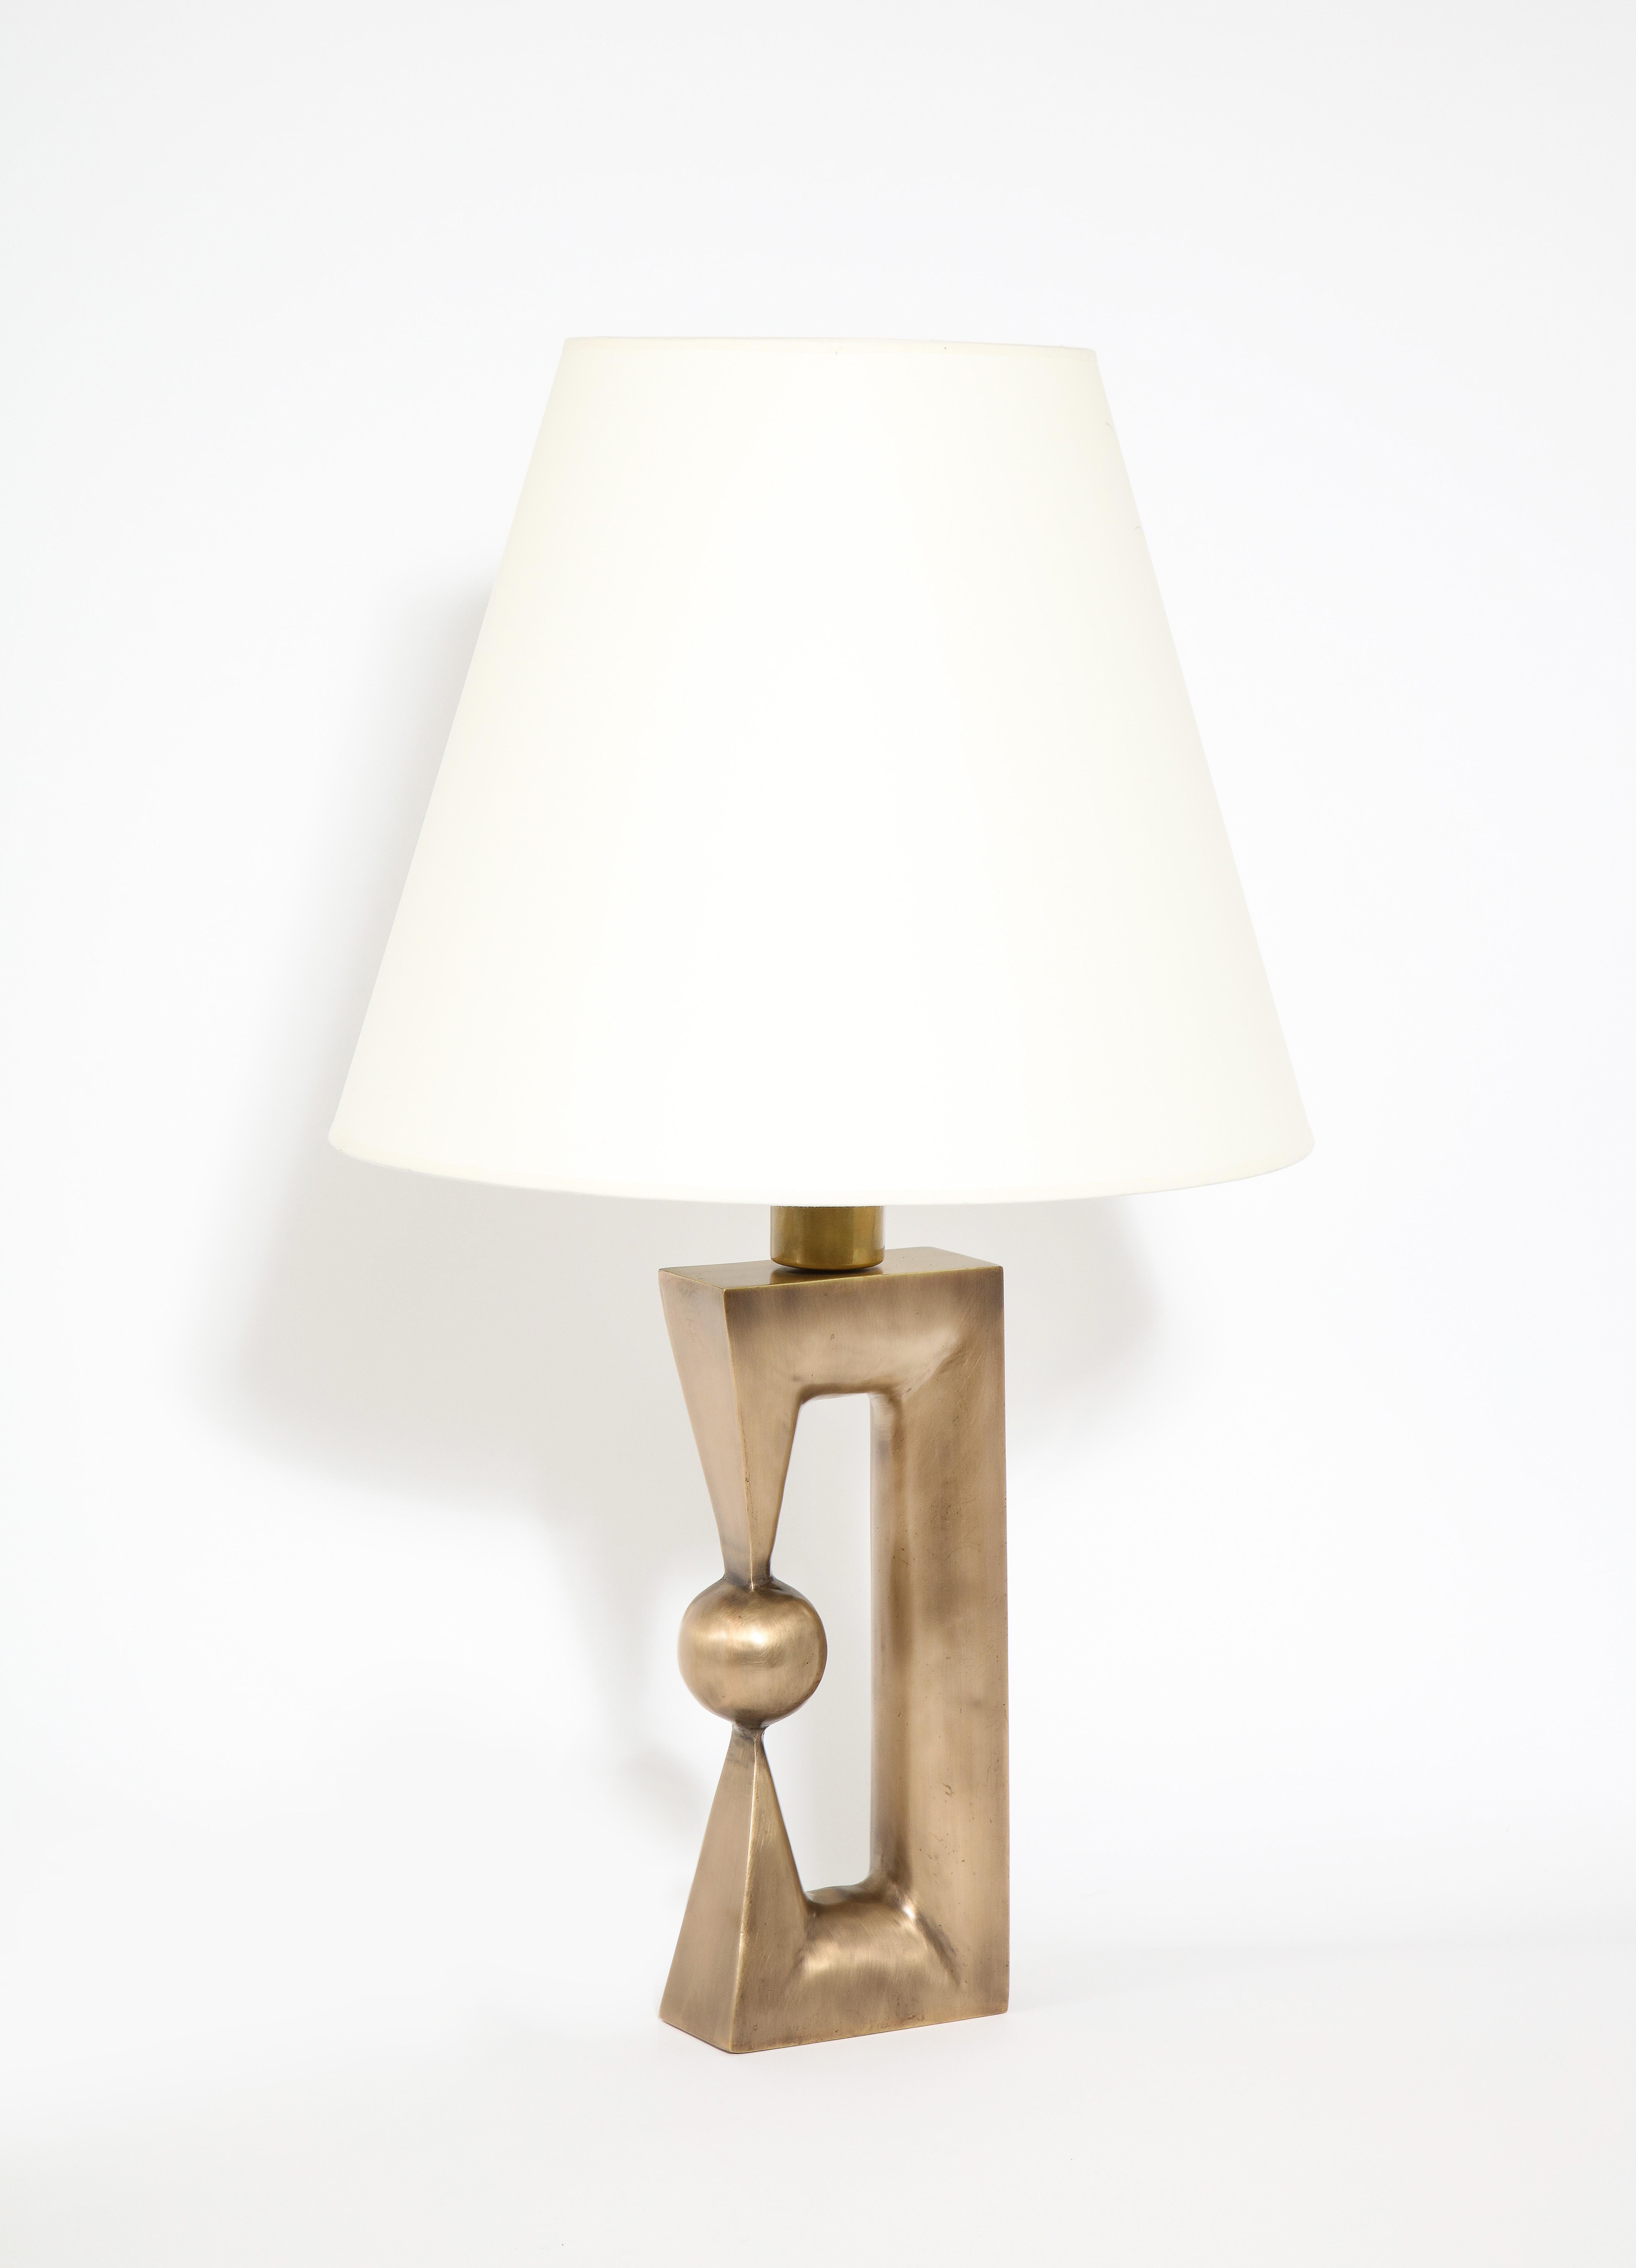 A made-to-order bronze table lamp inspired by a Noguchi sculpture, These lamps are made in the USA and are available in an array of custom finishes.

Base only dimensions: 6'' x 3